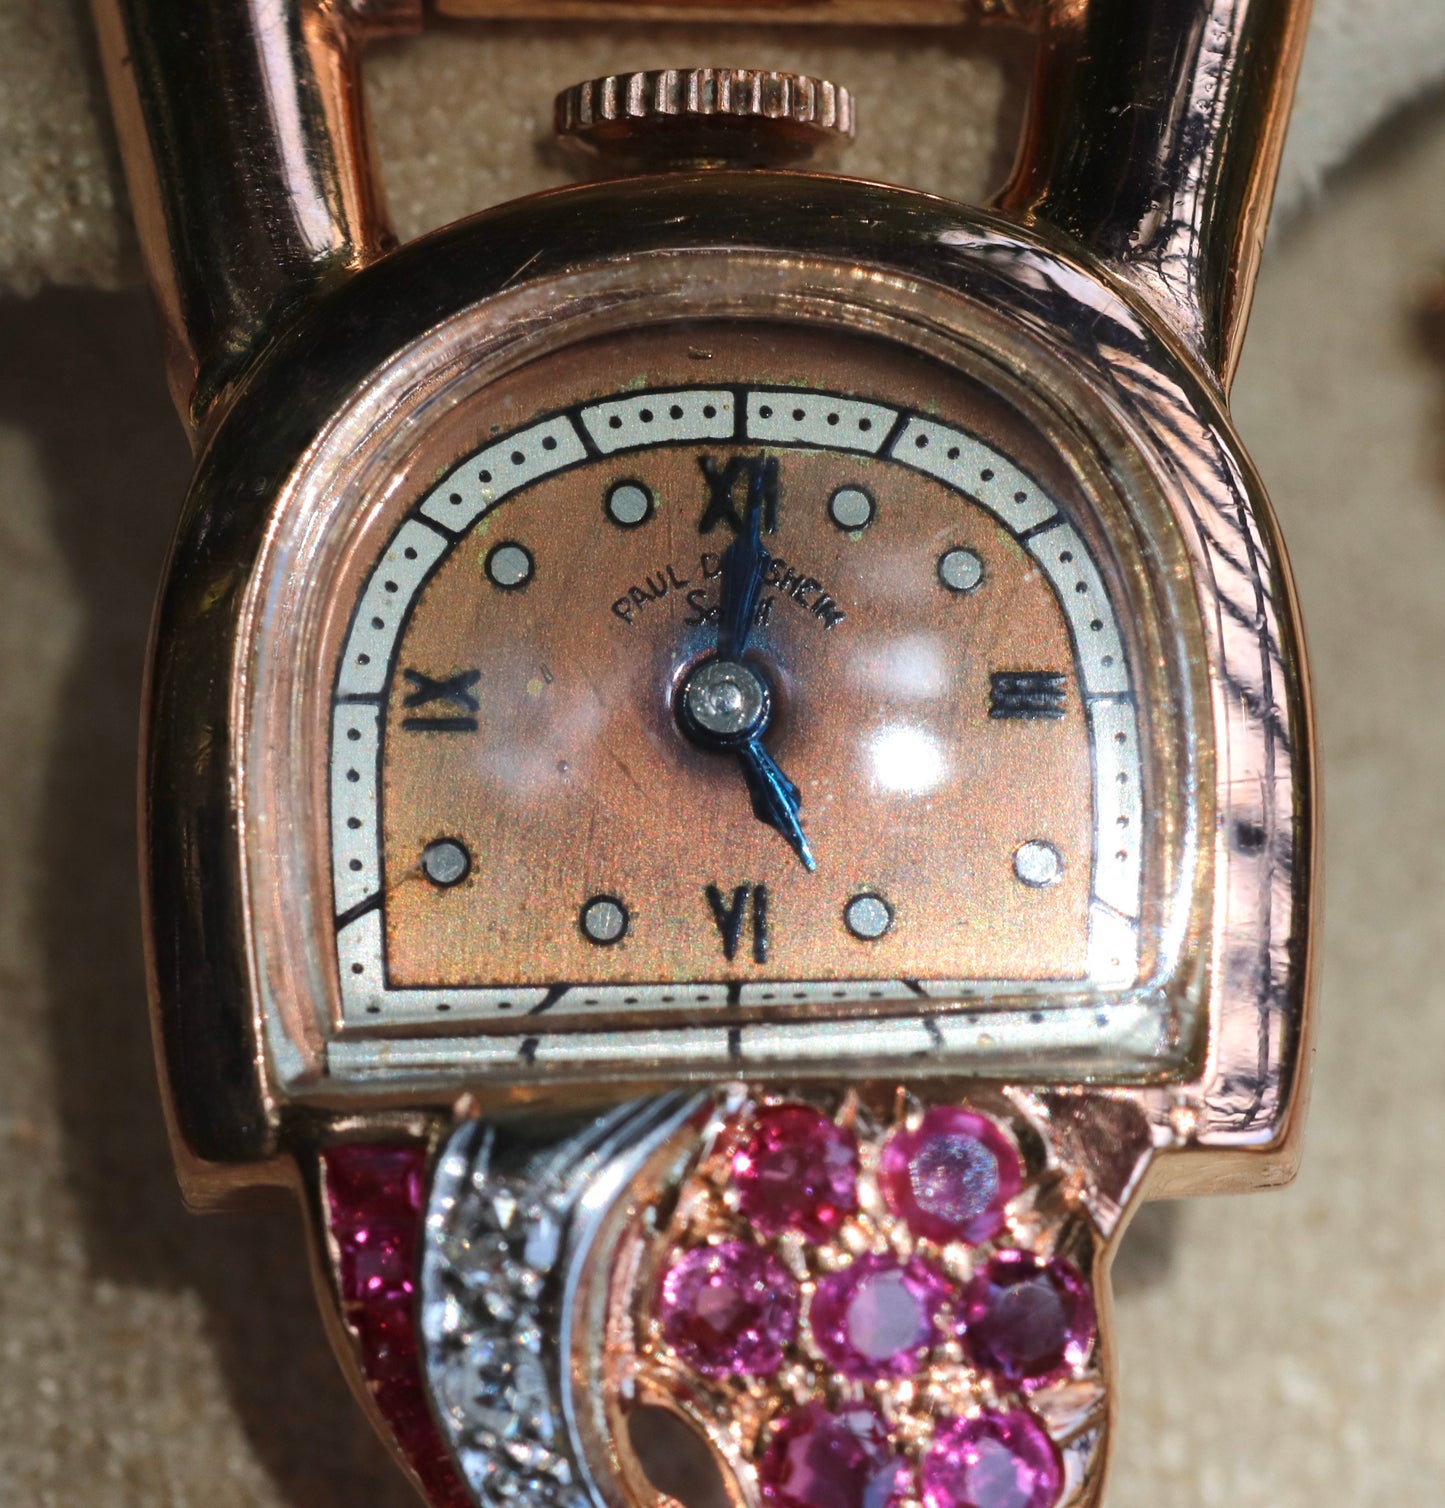 14k solid rose gold retro Paul Ditisheim wristwatch with rubies and diamonds 7.25”